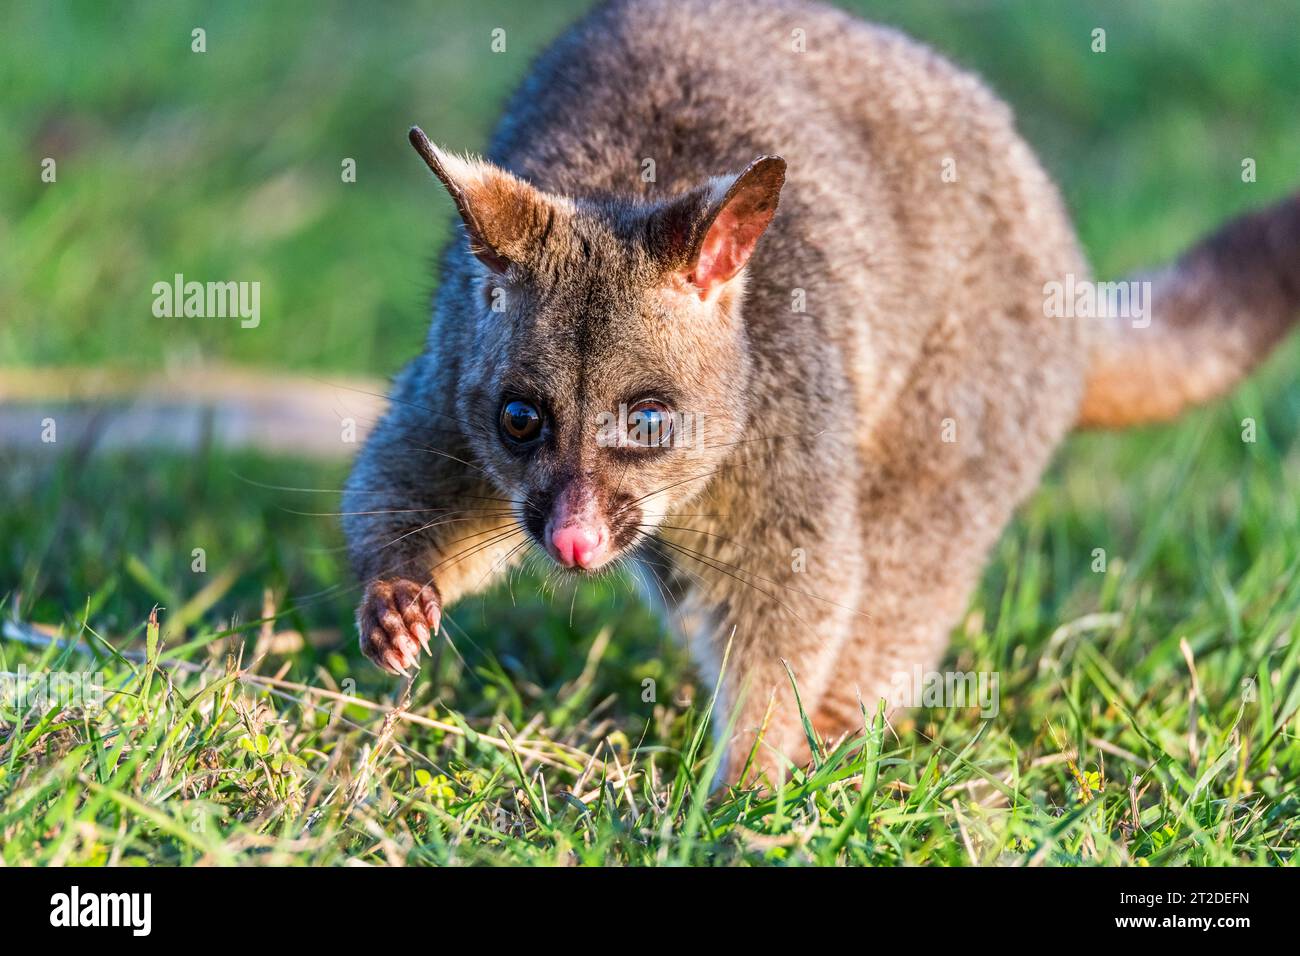 The common brushtail possum (Trichosurus vulpecula) is a nocturnal, semiarboreal marsupial of the family Phalangeridae, native to Australia. Stock Photo